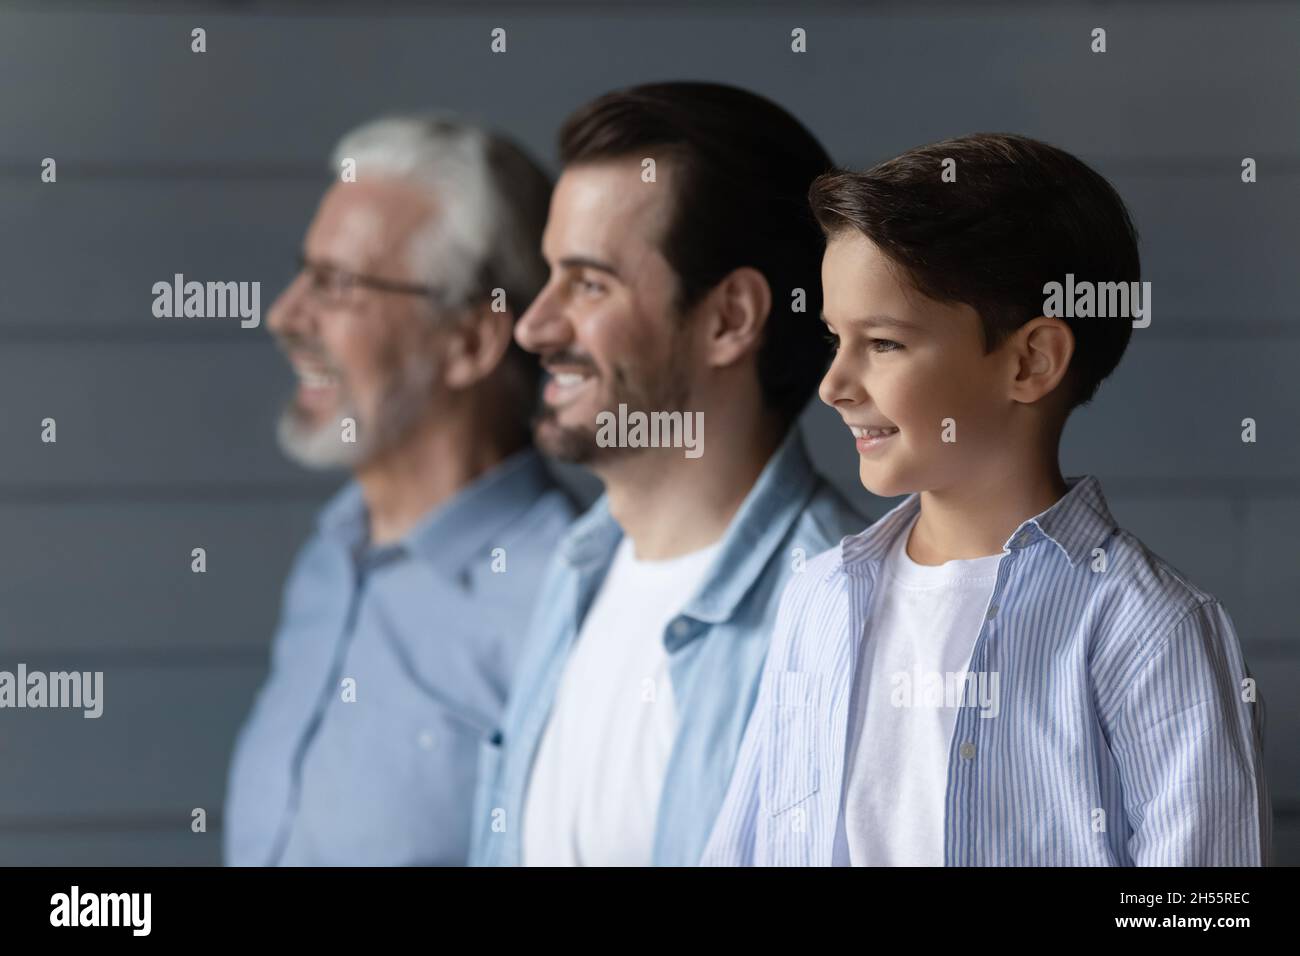 Family dynasty of 3 diverse males stand in line together Stock Photo